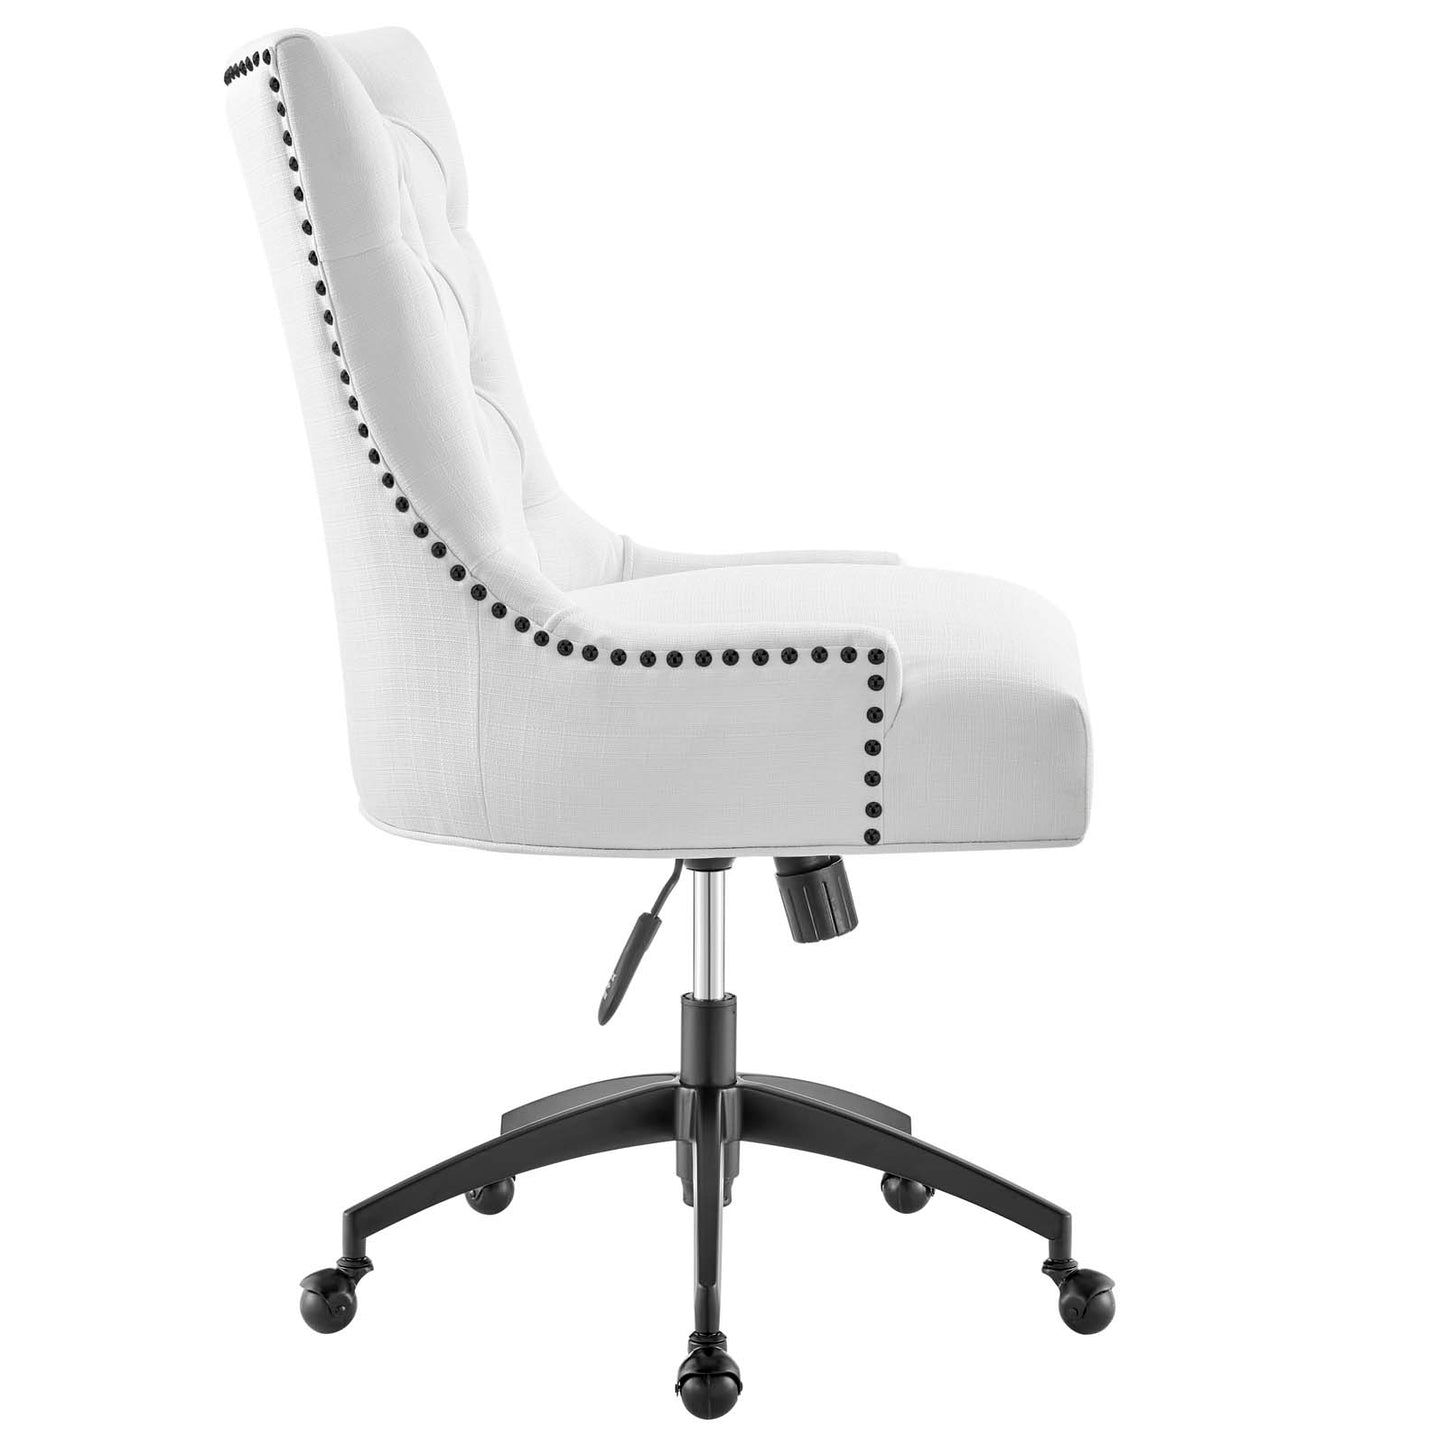 Regent Tufted Fabric Office Chair Black White EEI-4572-BLK-WHI